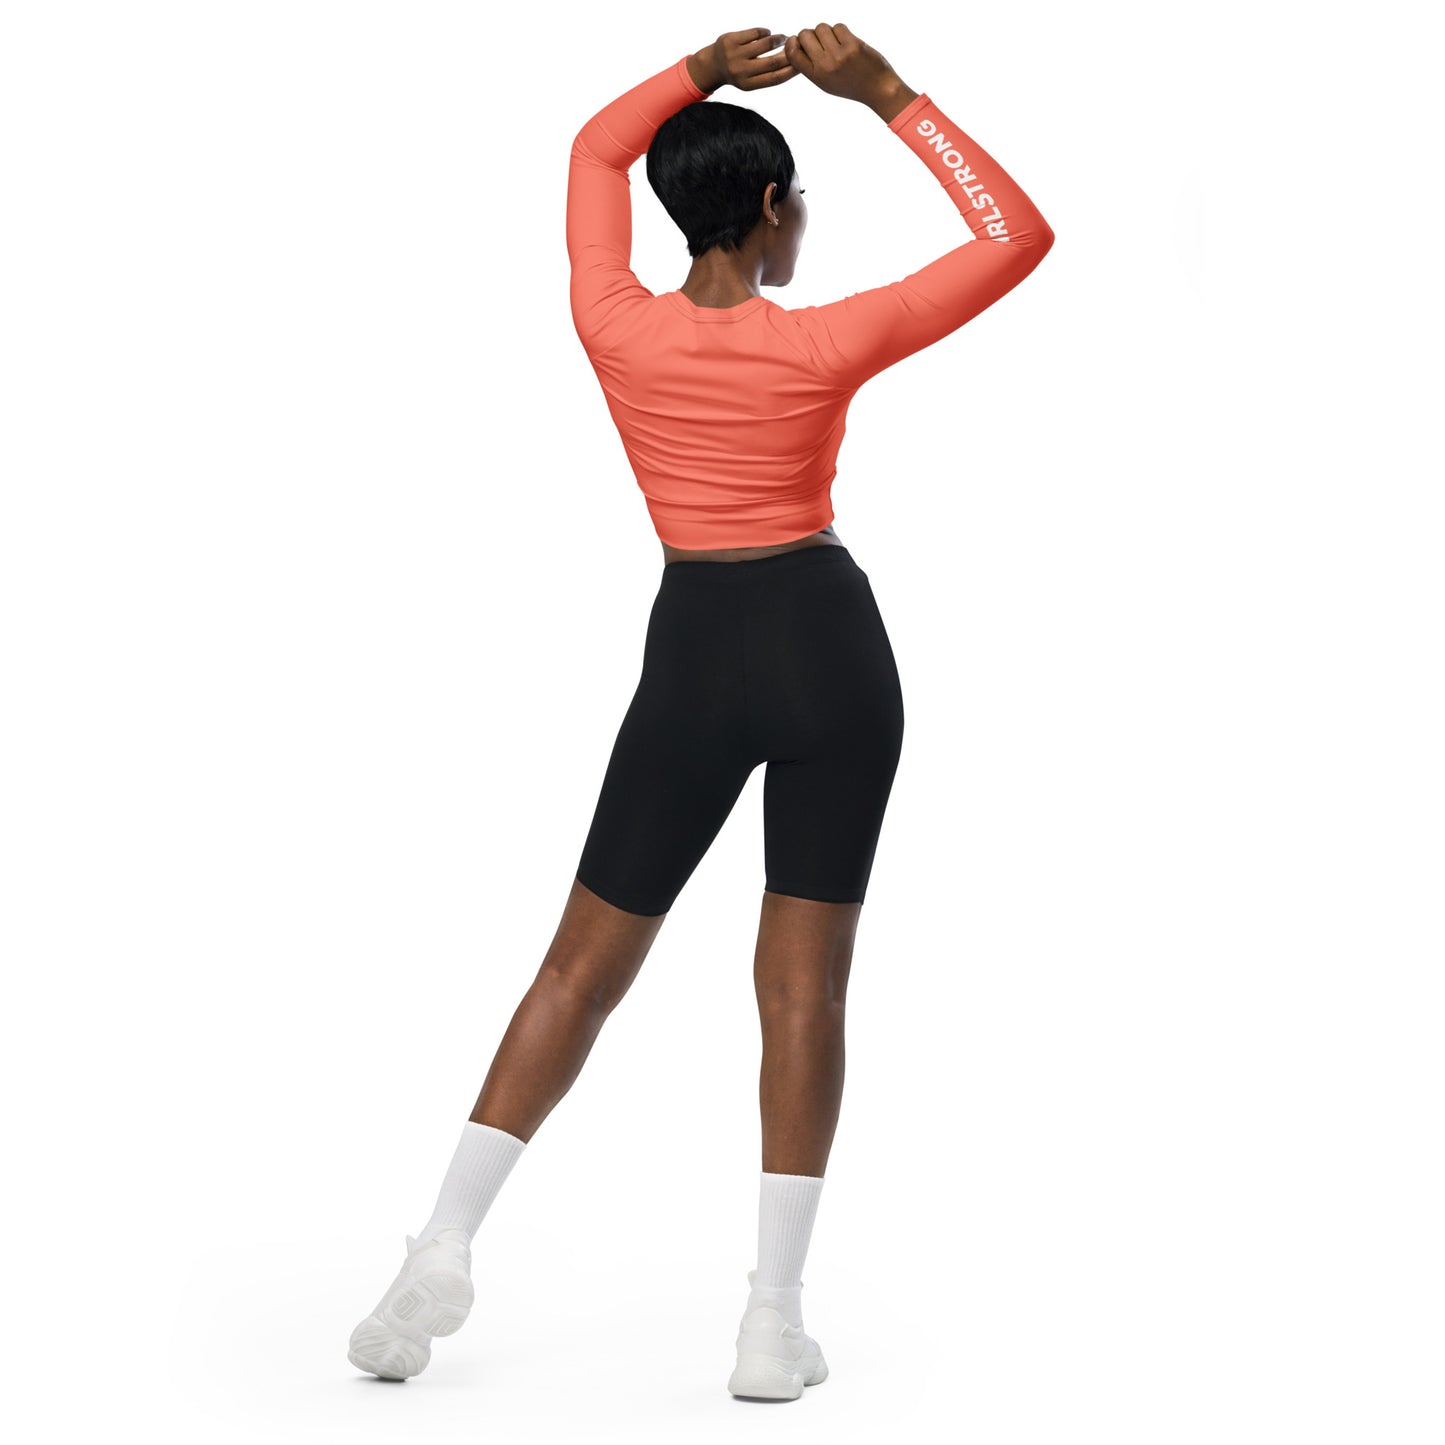 THE ESSENTIAL LONG SLEEVE FITTED CROP TOP BRIGHT ORANGE